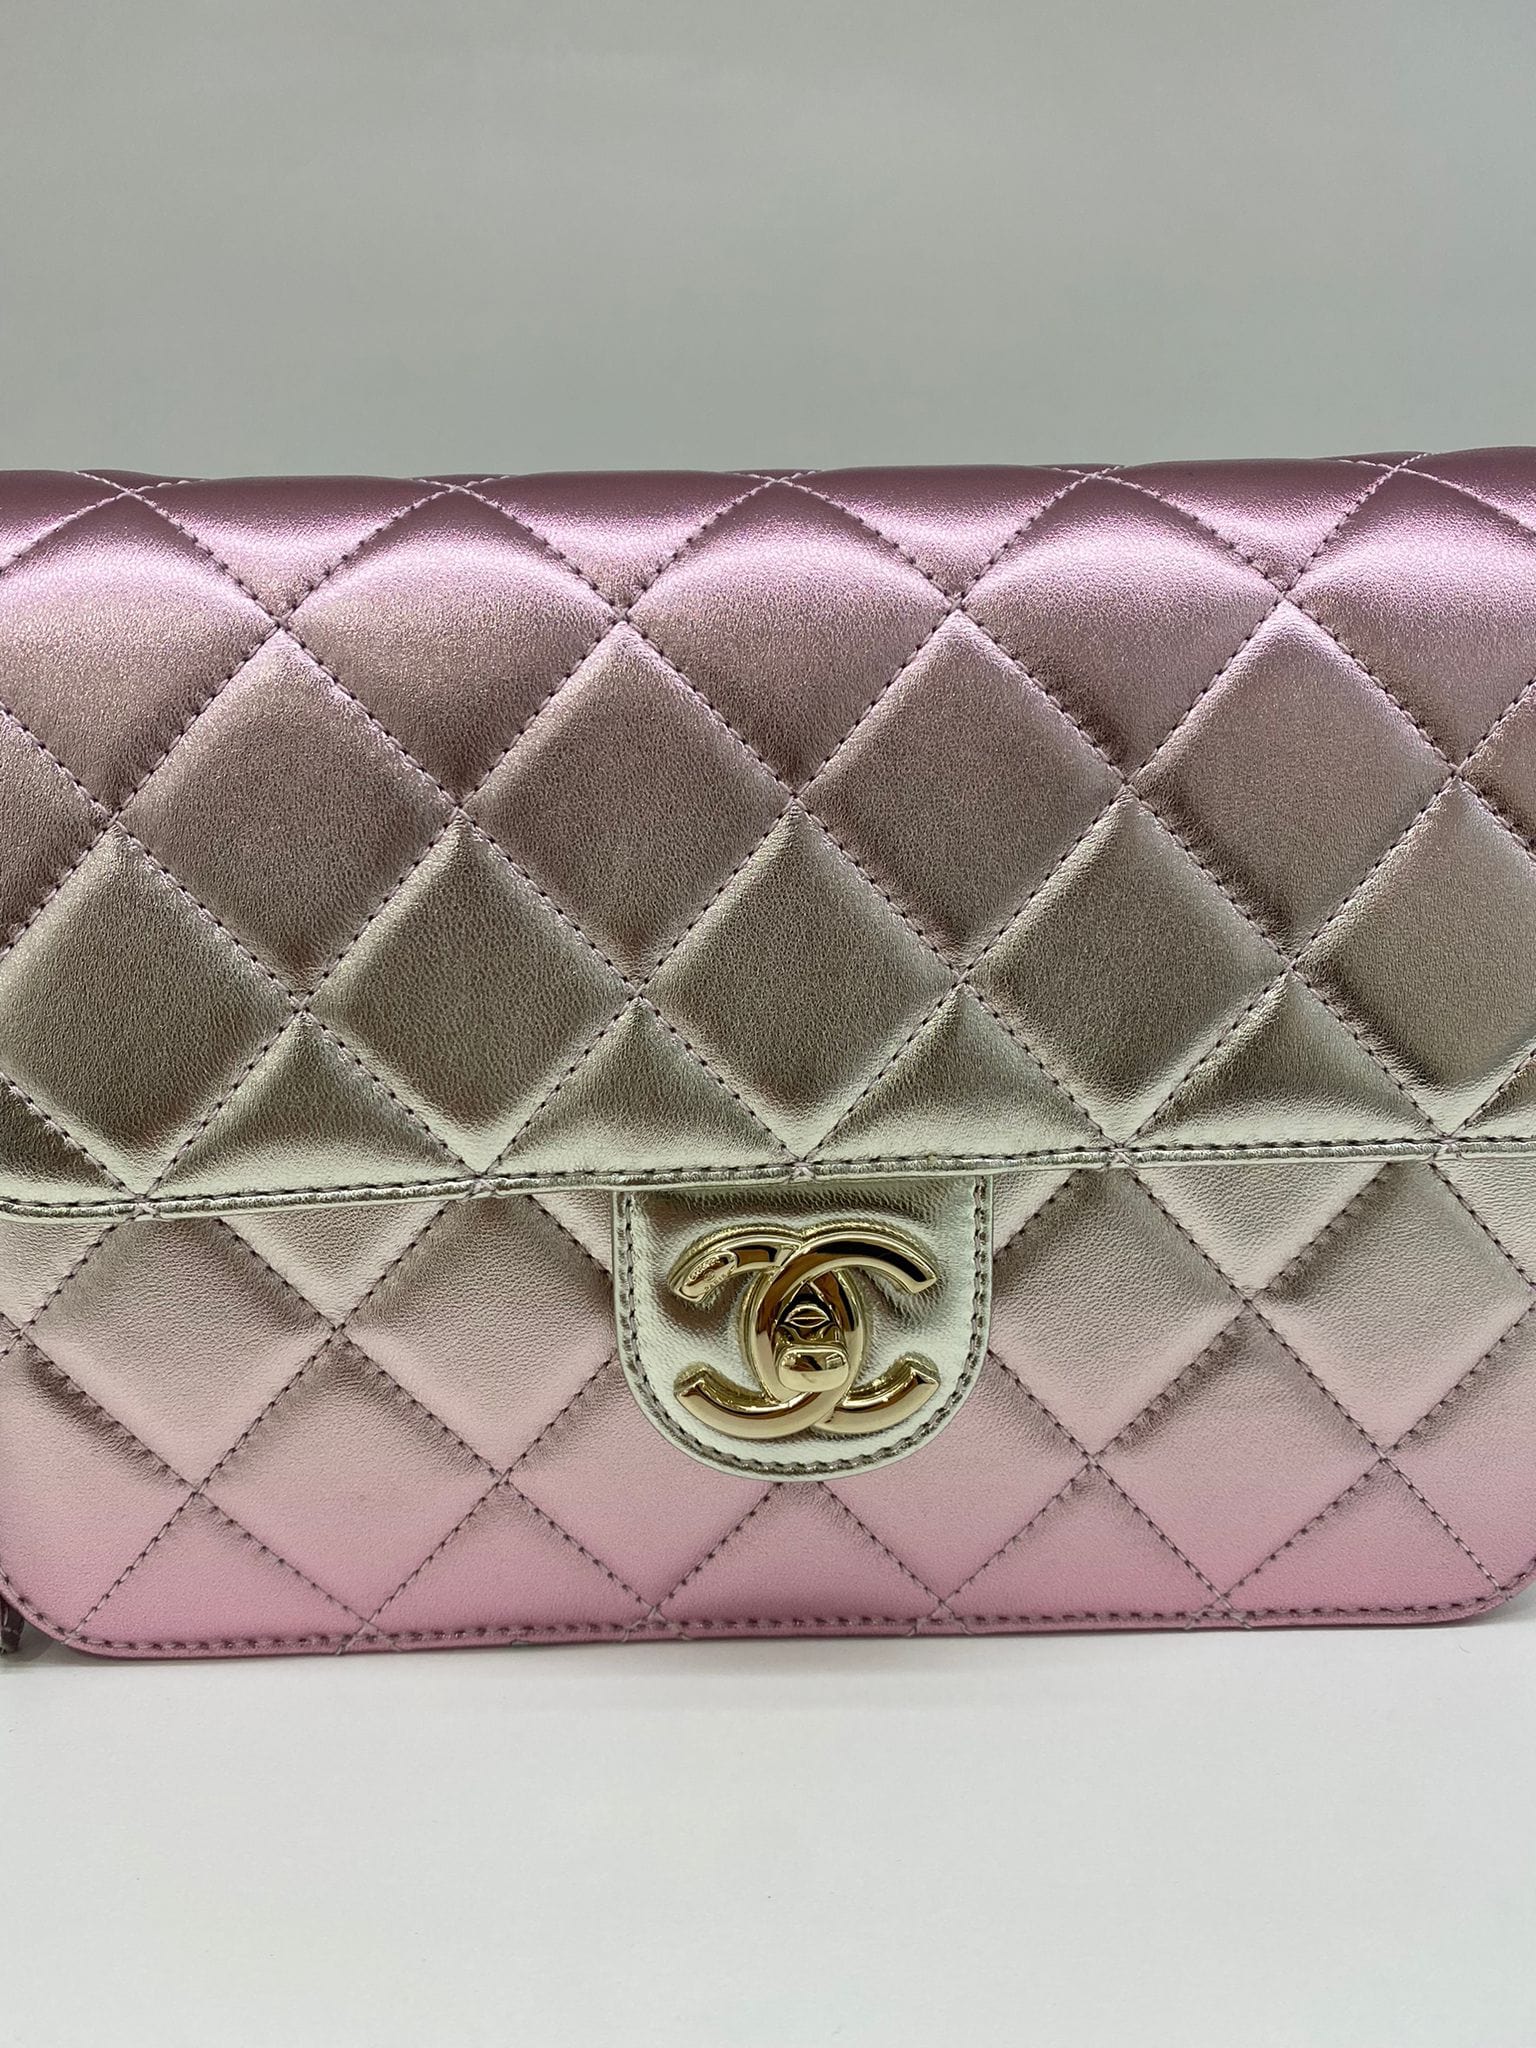 PH Luxury Consignment Chanel Large Like A Wallet Metallic Pink